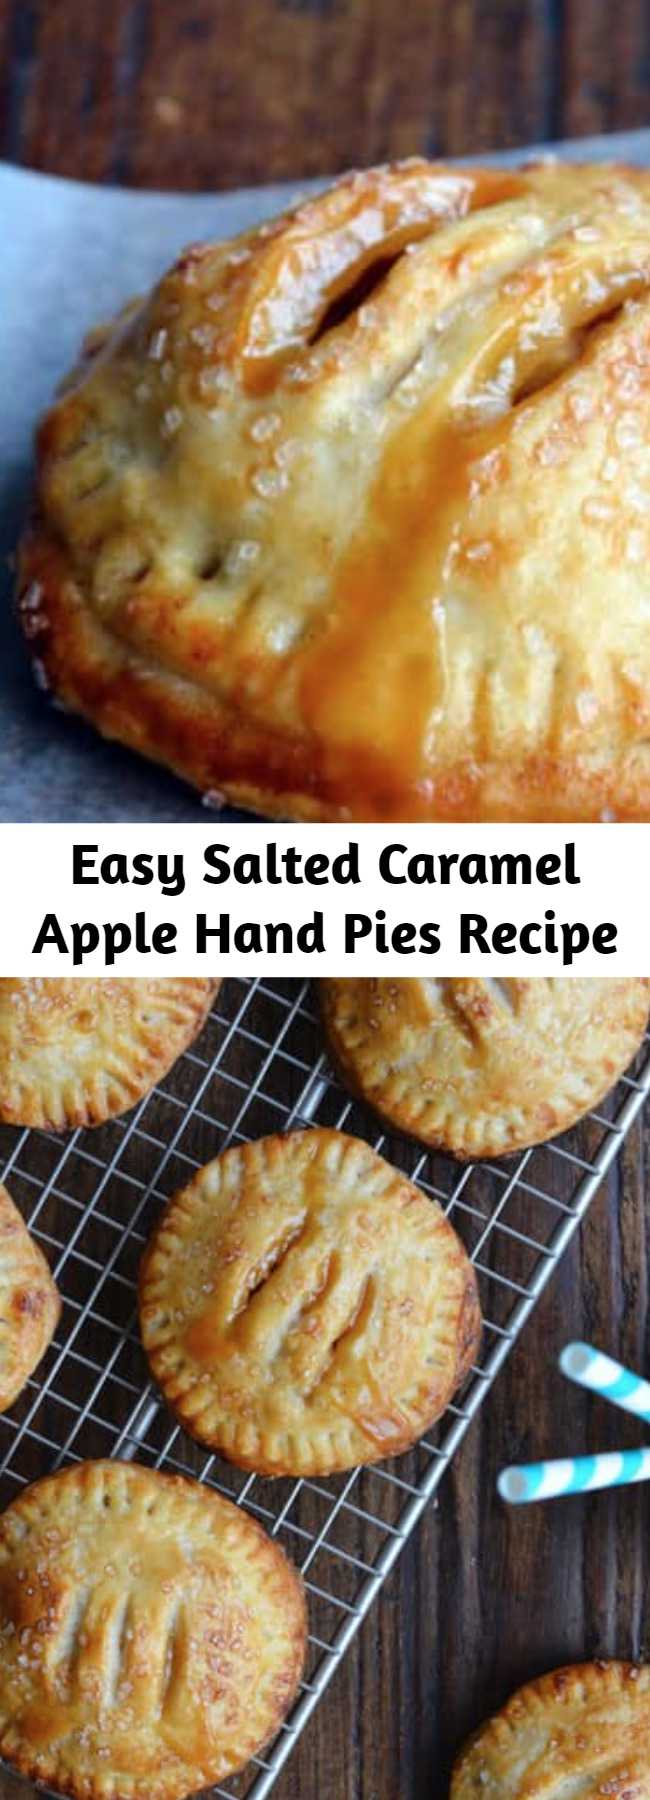 Easy Salted Caramel Apple Hand Pies Recipe - A pinch of sea salt lends a savory balance to these handheld treats that ooze fresh fruit flavor and silky smooth caramel. It’s the dynamic dessert duo, and it’s all wrapped up in finger-friendly package. No forks, no plates, no sharing required!